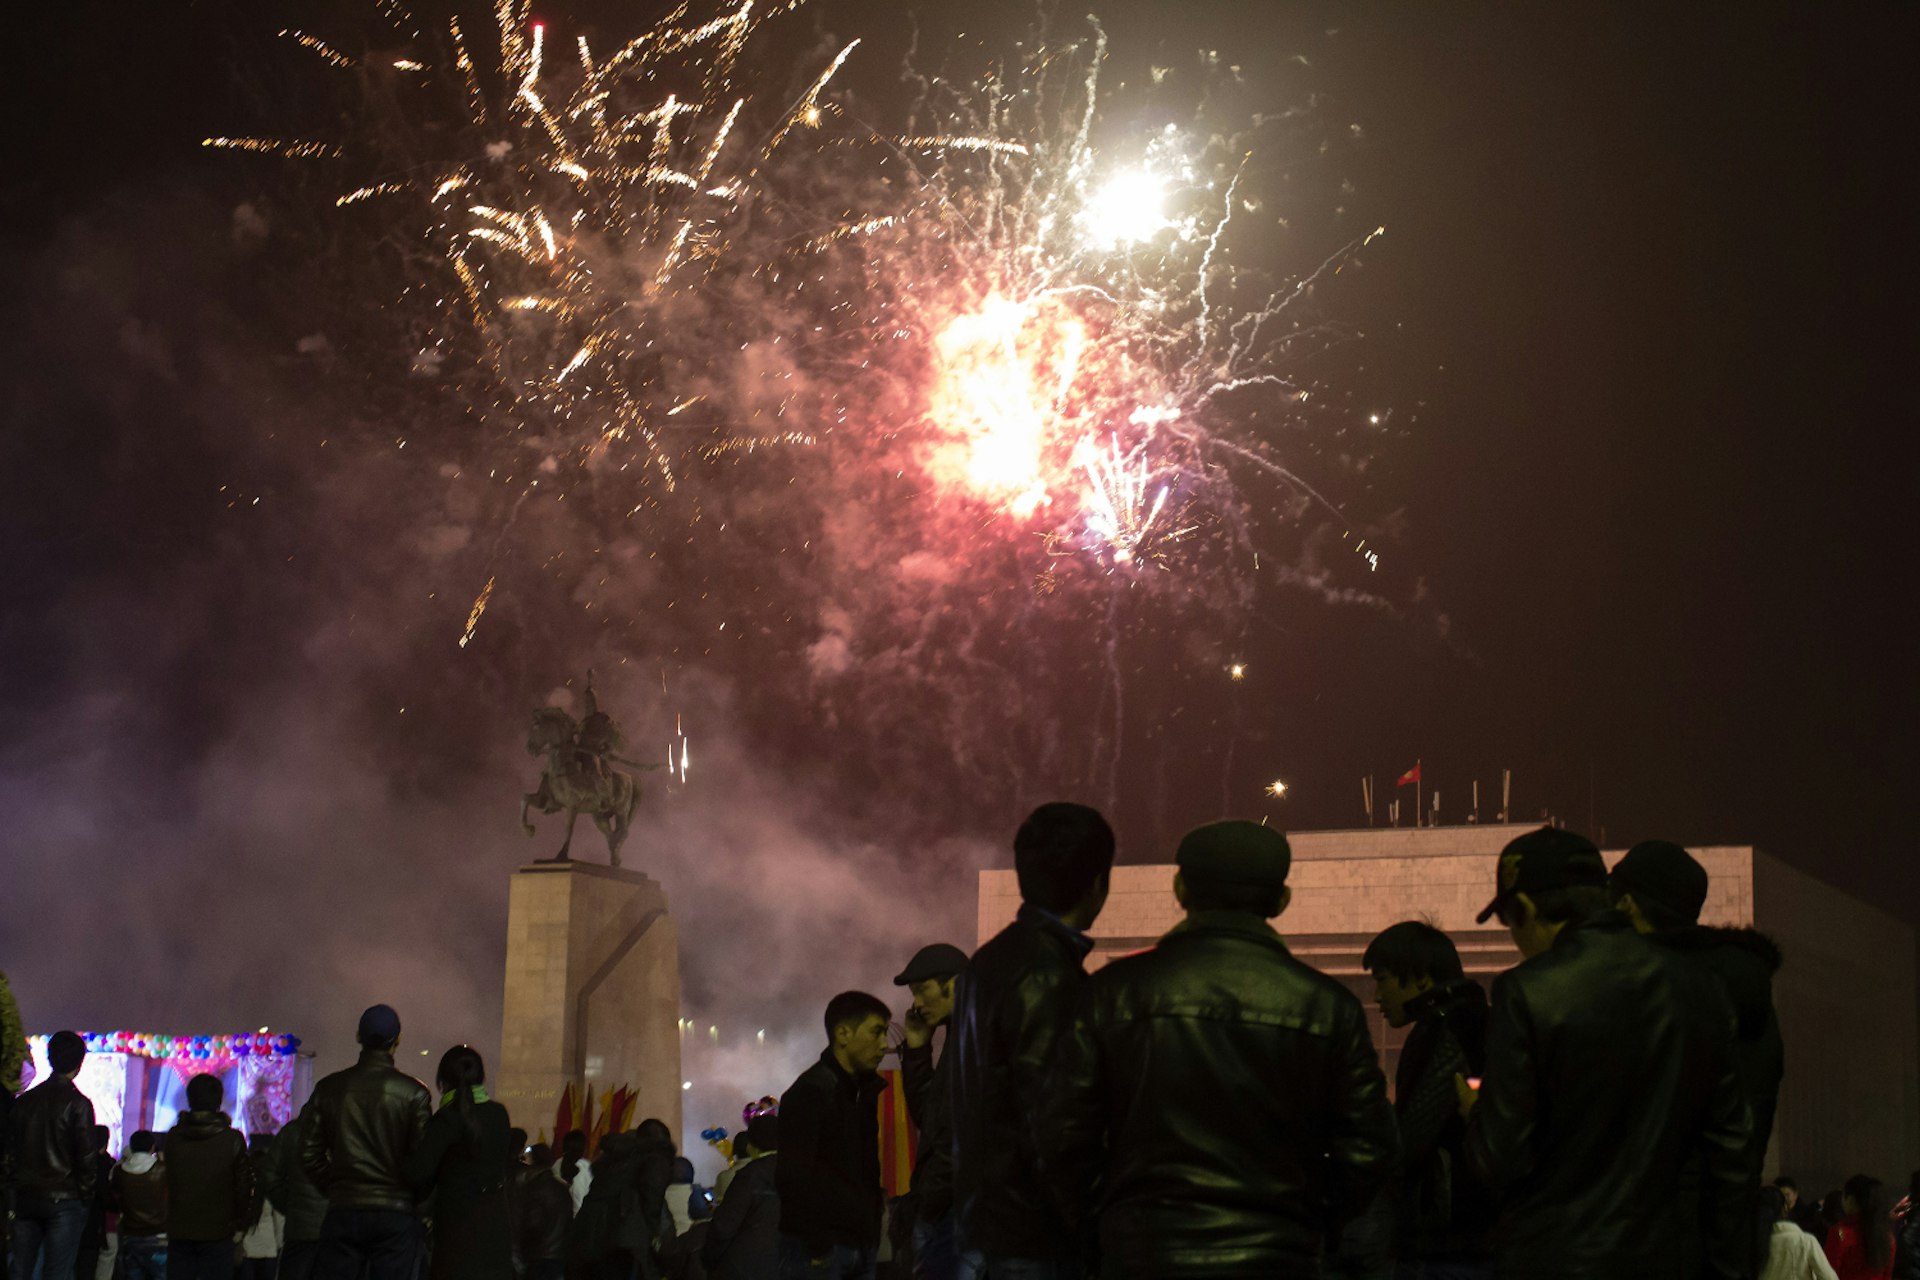 Fireworks often round out the night during Nowruz celebrations in Central Asia © Stephen Lioy / Lonely Planet